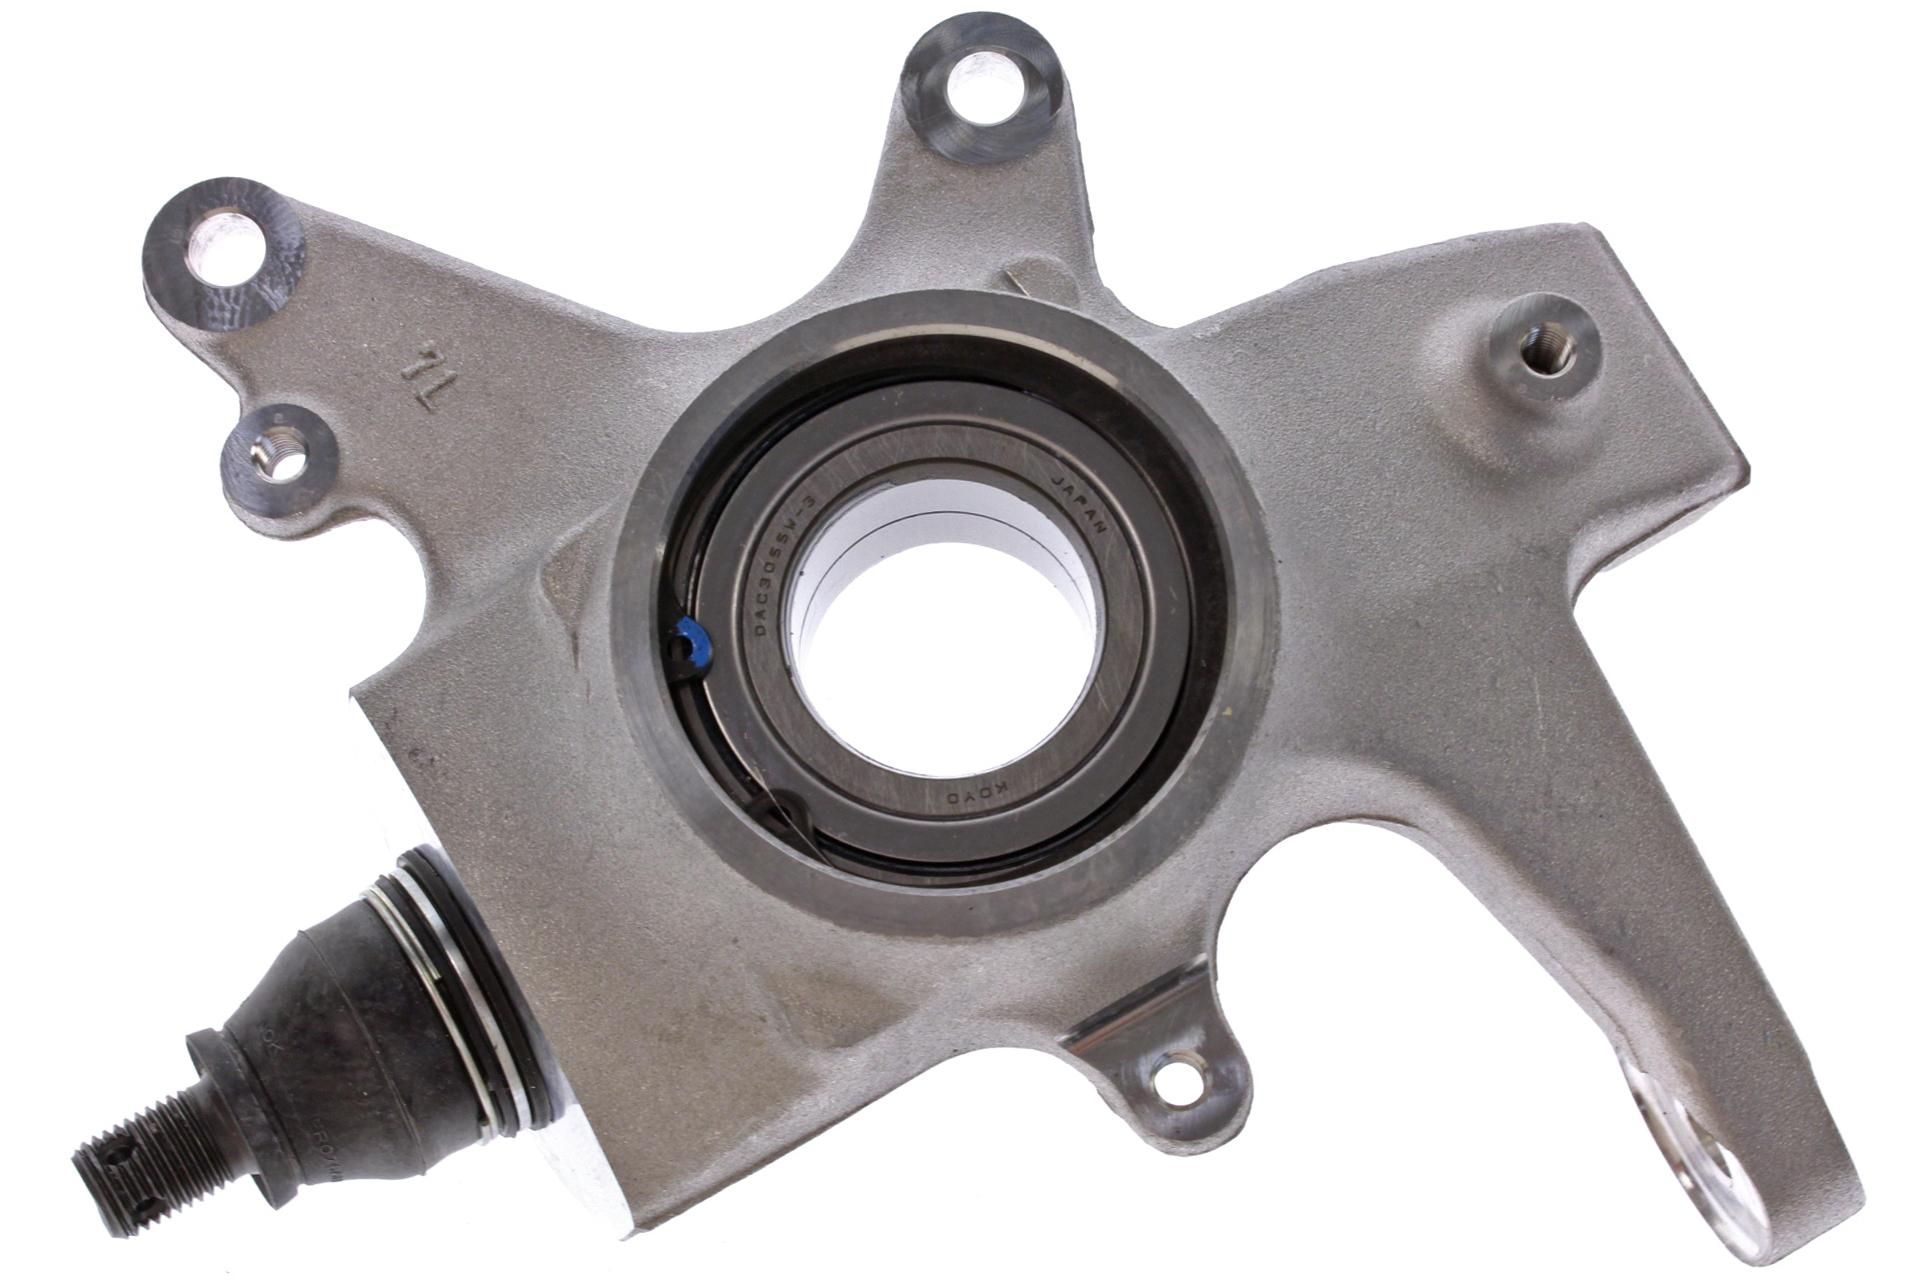 3B4-23501-00-00 Superseded by 3B4-23501-01-00 - STEERING KNUCKLE ASS